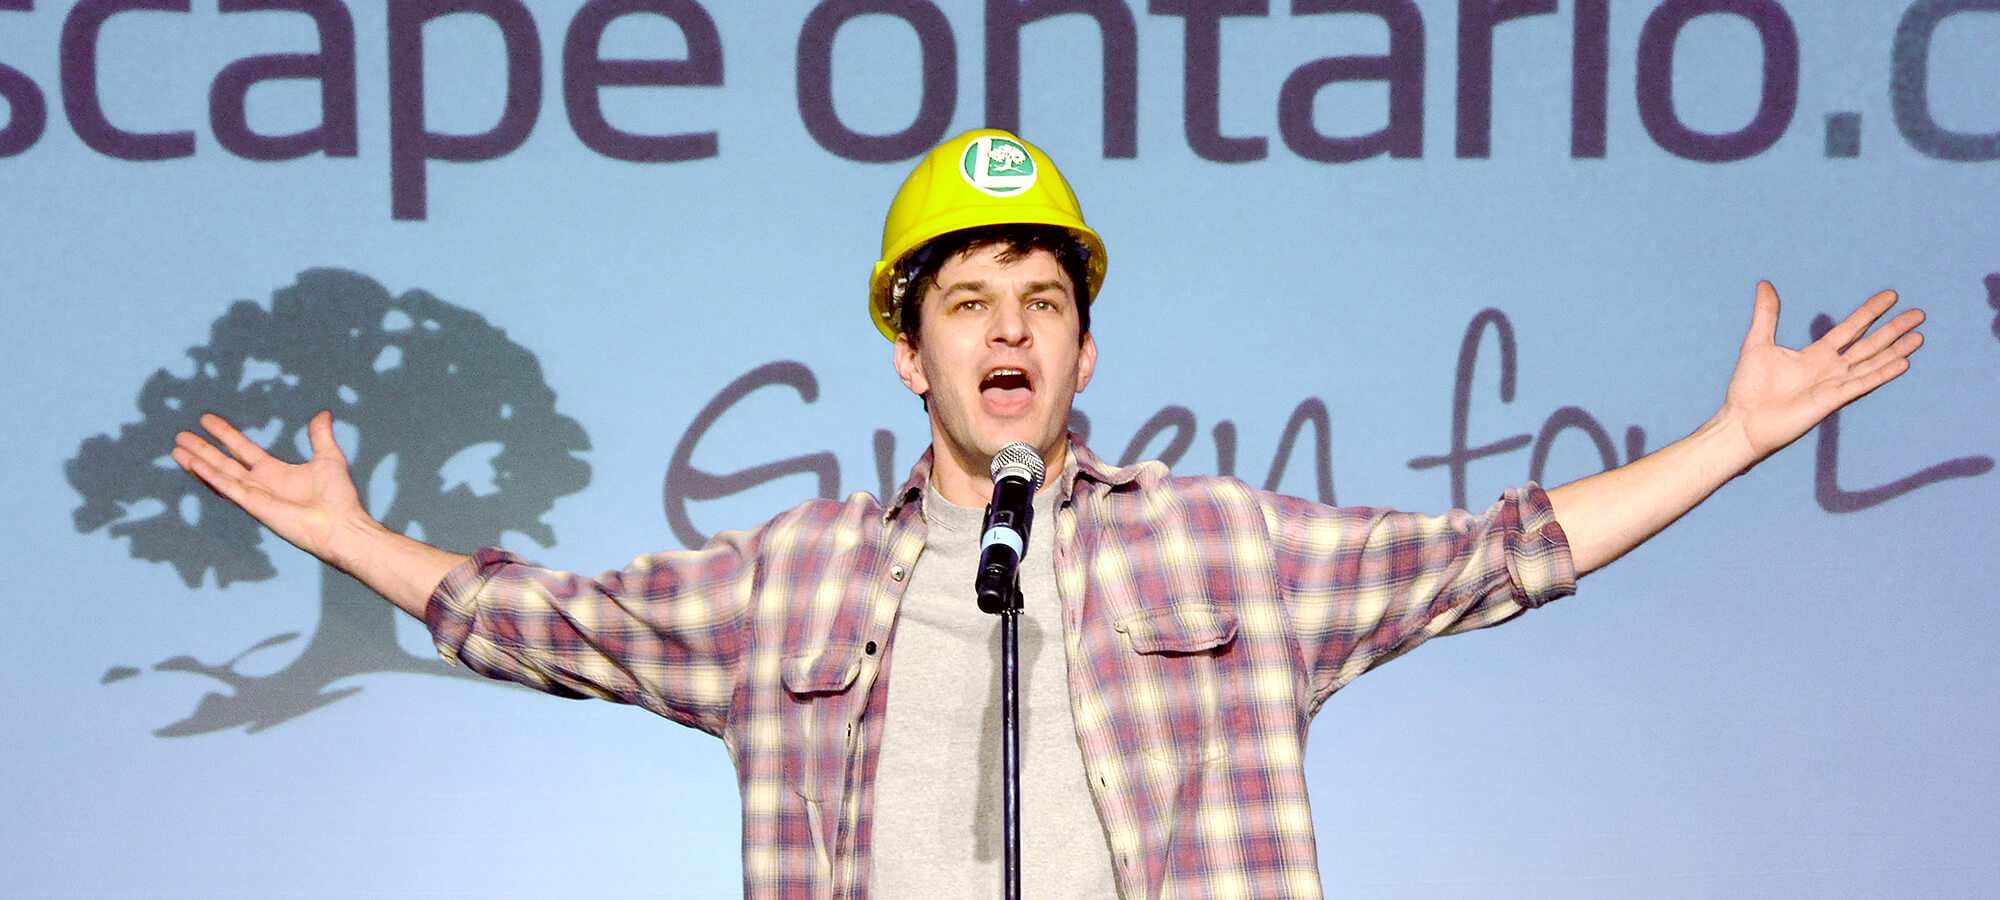 man in a construction hat on stage performing